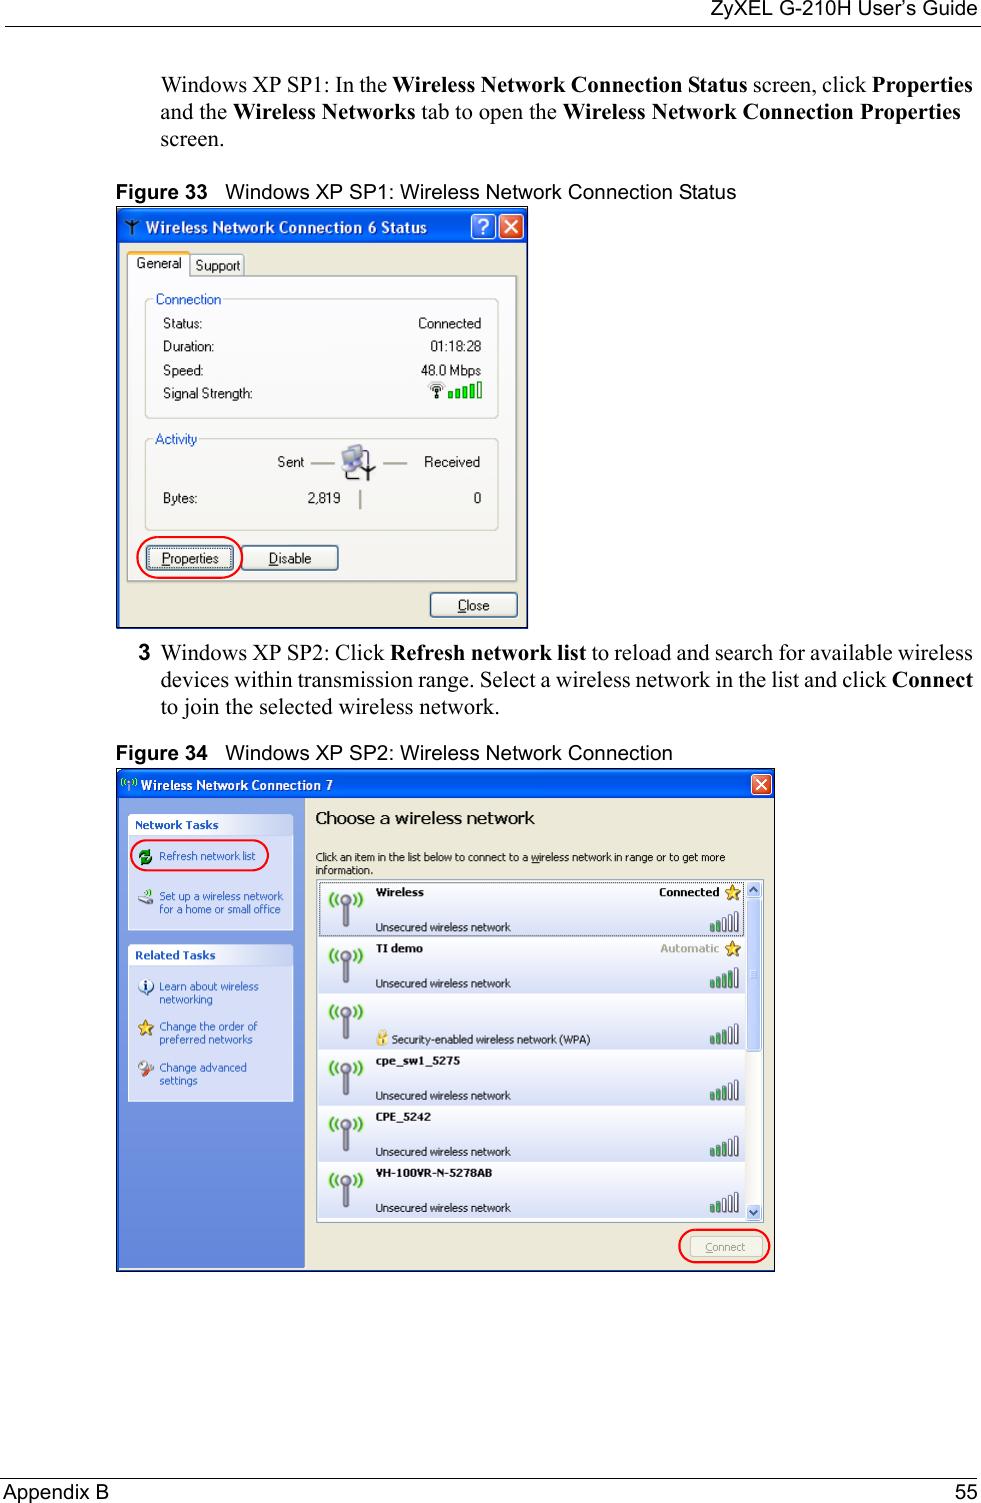 ZyXEL G-210H User’s GuideAppendix B 55Windows XP SP1: In the Wireless Network Connection Status screen, click Properties and the Wireless Networks tab to open the Wireless Network Connection Properties screen.Figure 33   Windows XP SP1: Wireless Network Connection Status3Windows XP SP2: Click Refresh network list to reload and search for available wireless devices within transmission range. Select a wireless network in the list and click Connect to join the selected wireless network.Figure 34   Windows XP SP2: Wireless Network Connection